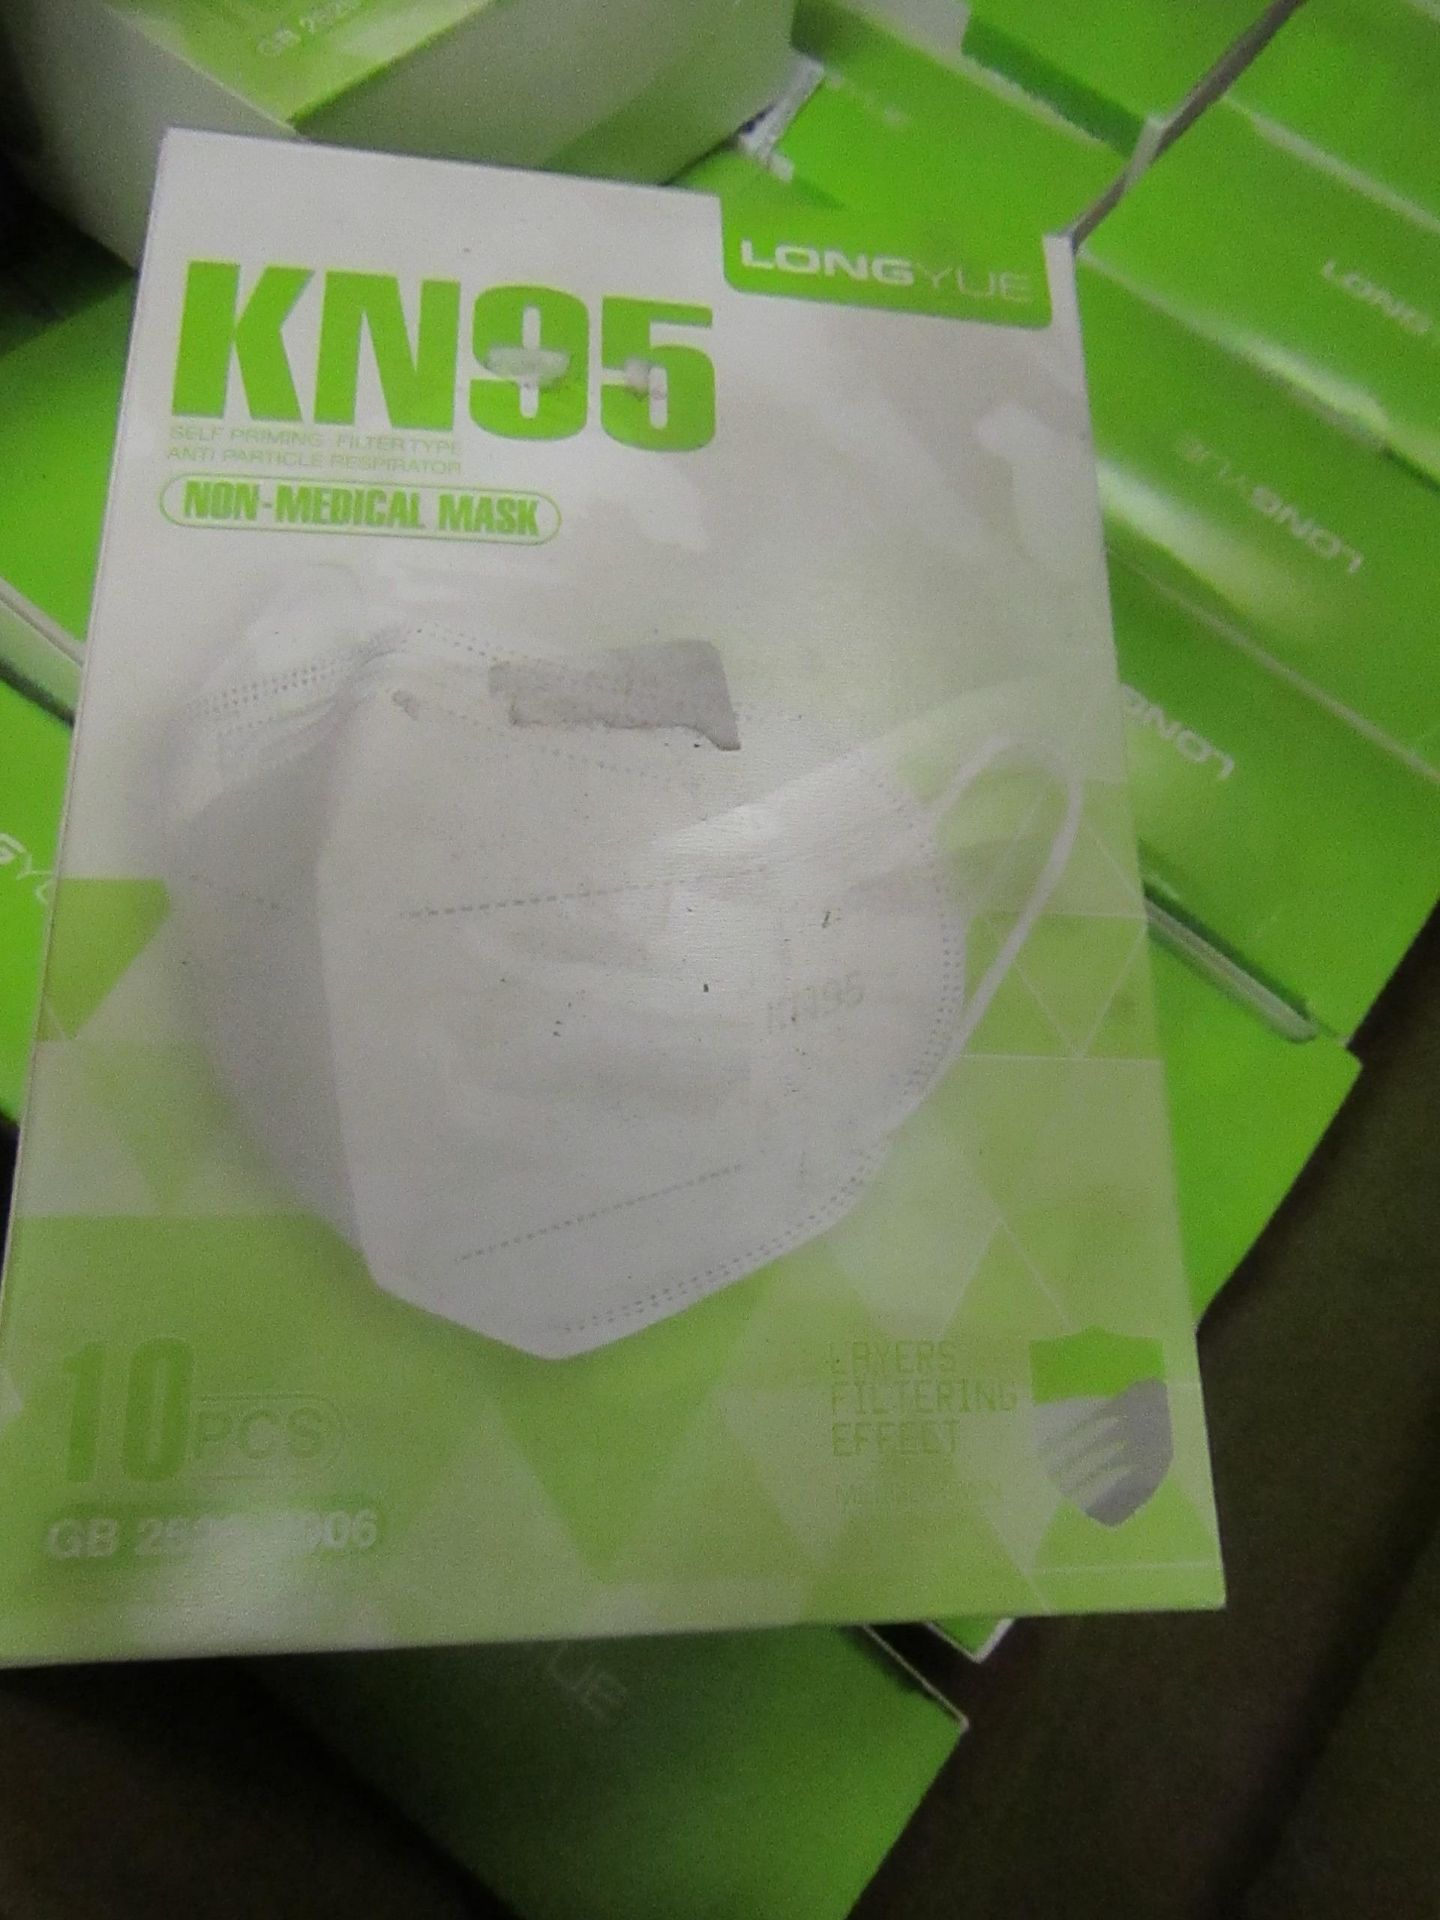 10 x KN95 Non-Medical Masks new & packaged see image